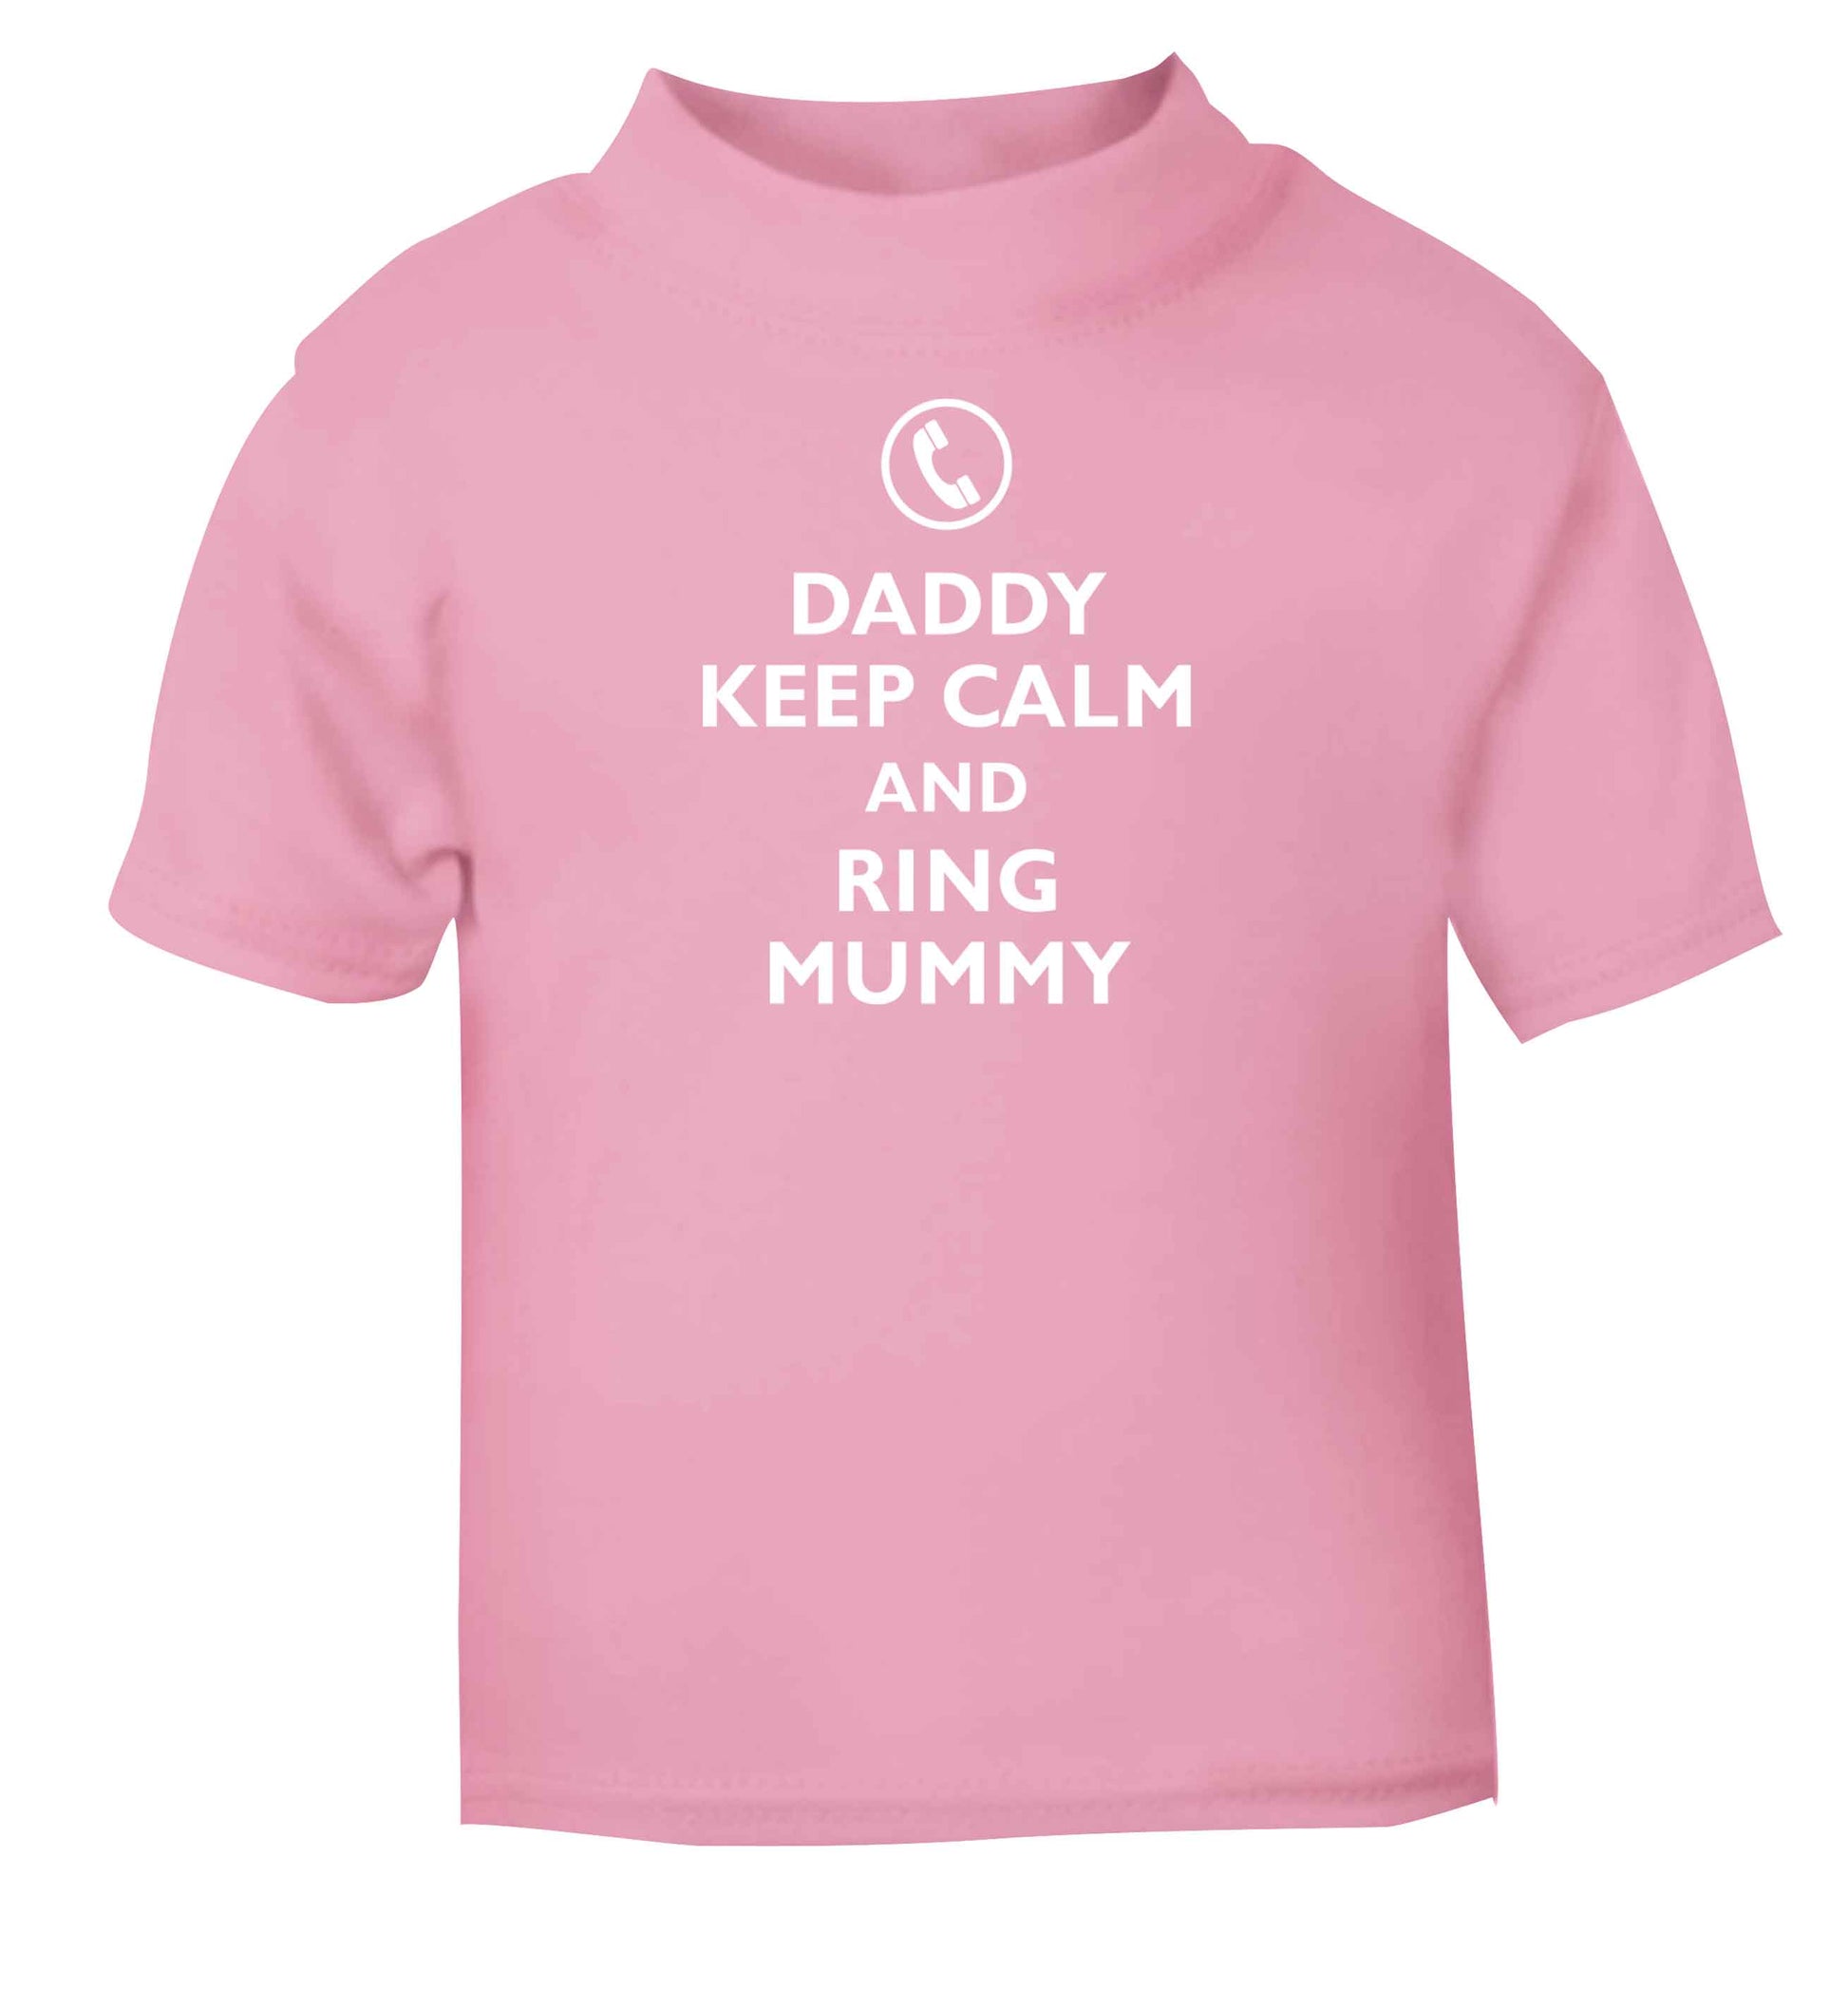 Daddy keep calm and ring mummy Children's light pink Tshirt 12-13 Years